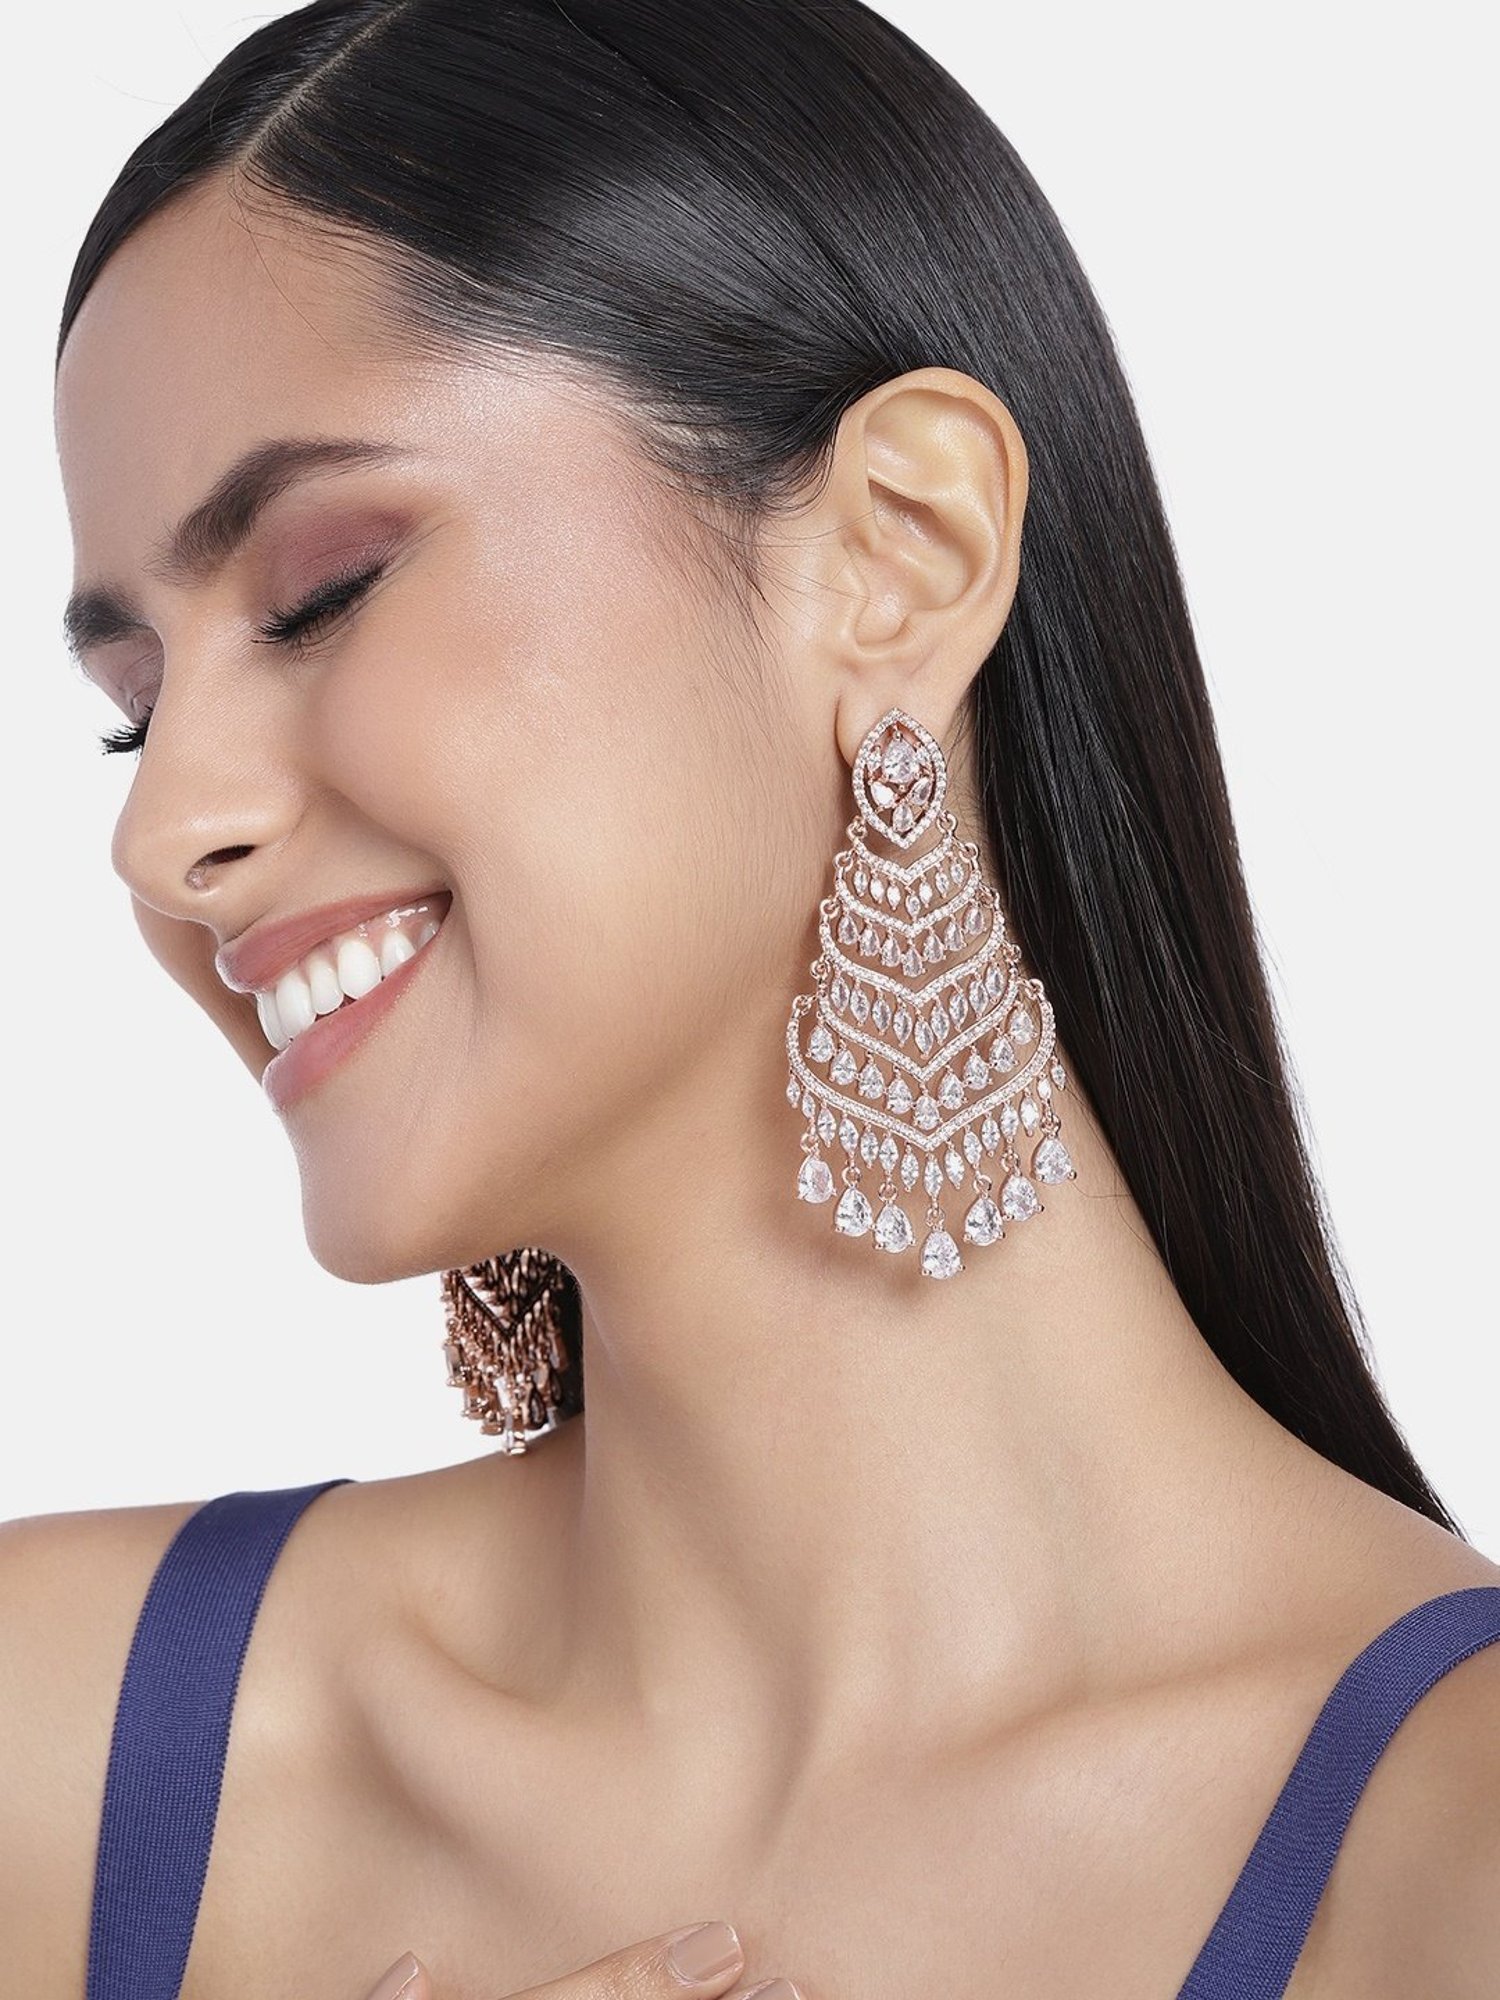 Buy Earrings with Dangling chandelier earrings with pearls. made in india.  brass made earrings Online In India At Discounted Prices